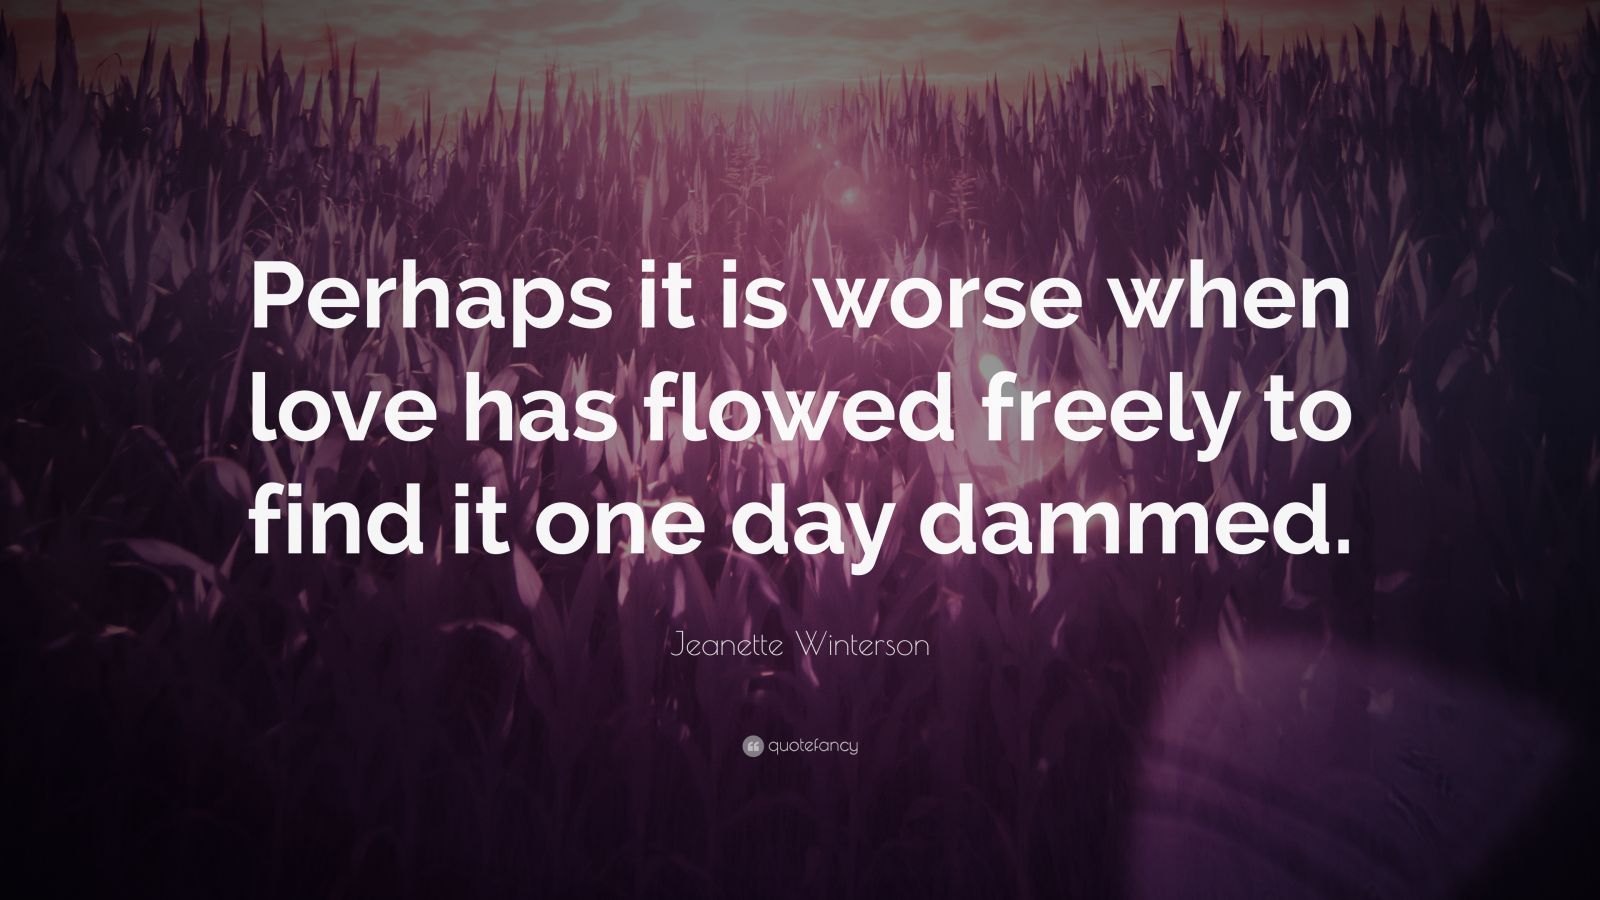 Jeanette Winterson Quote Perhaps It Is Worse When Love Has Flowed Freely To Find It One Day